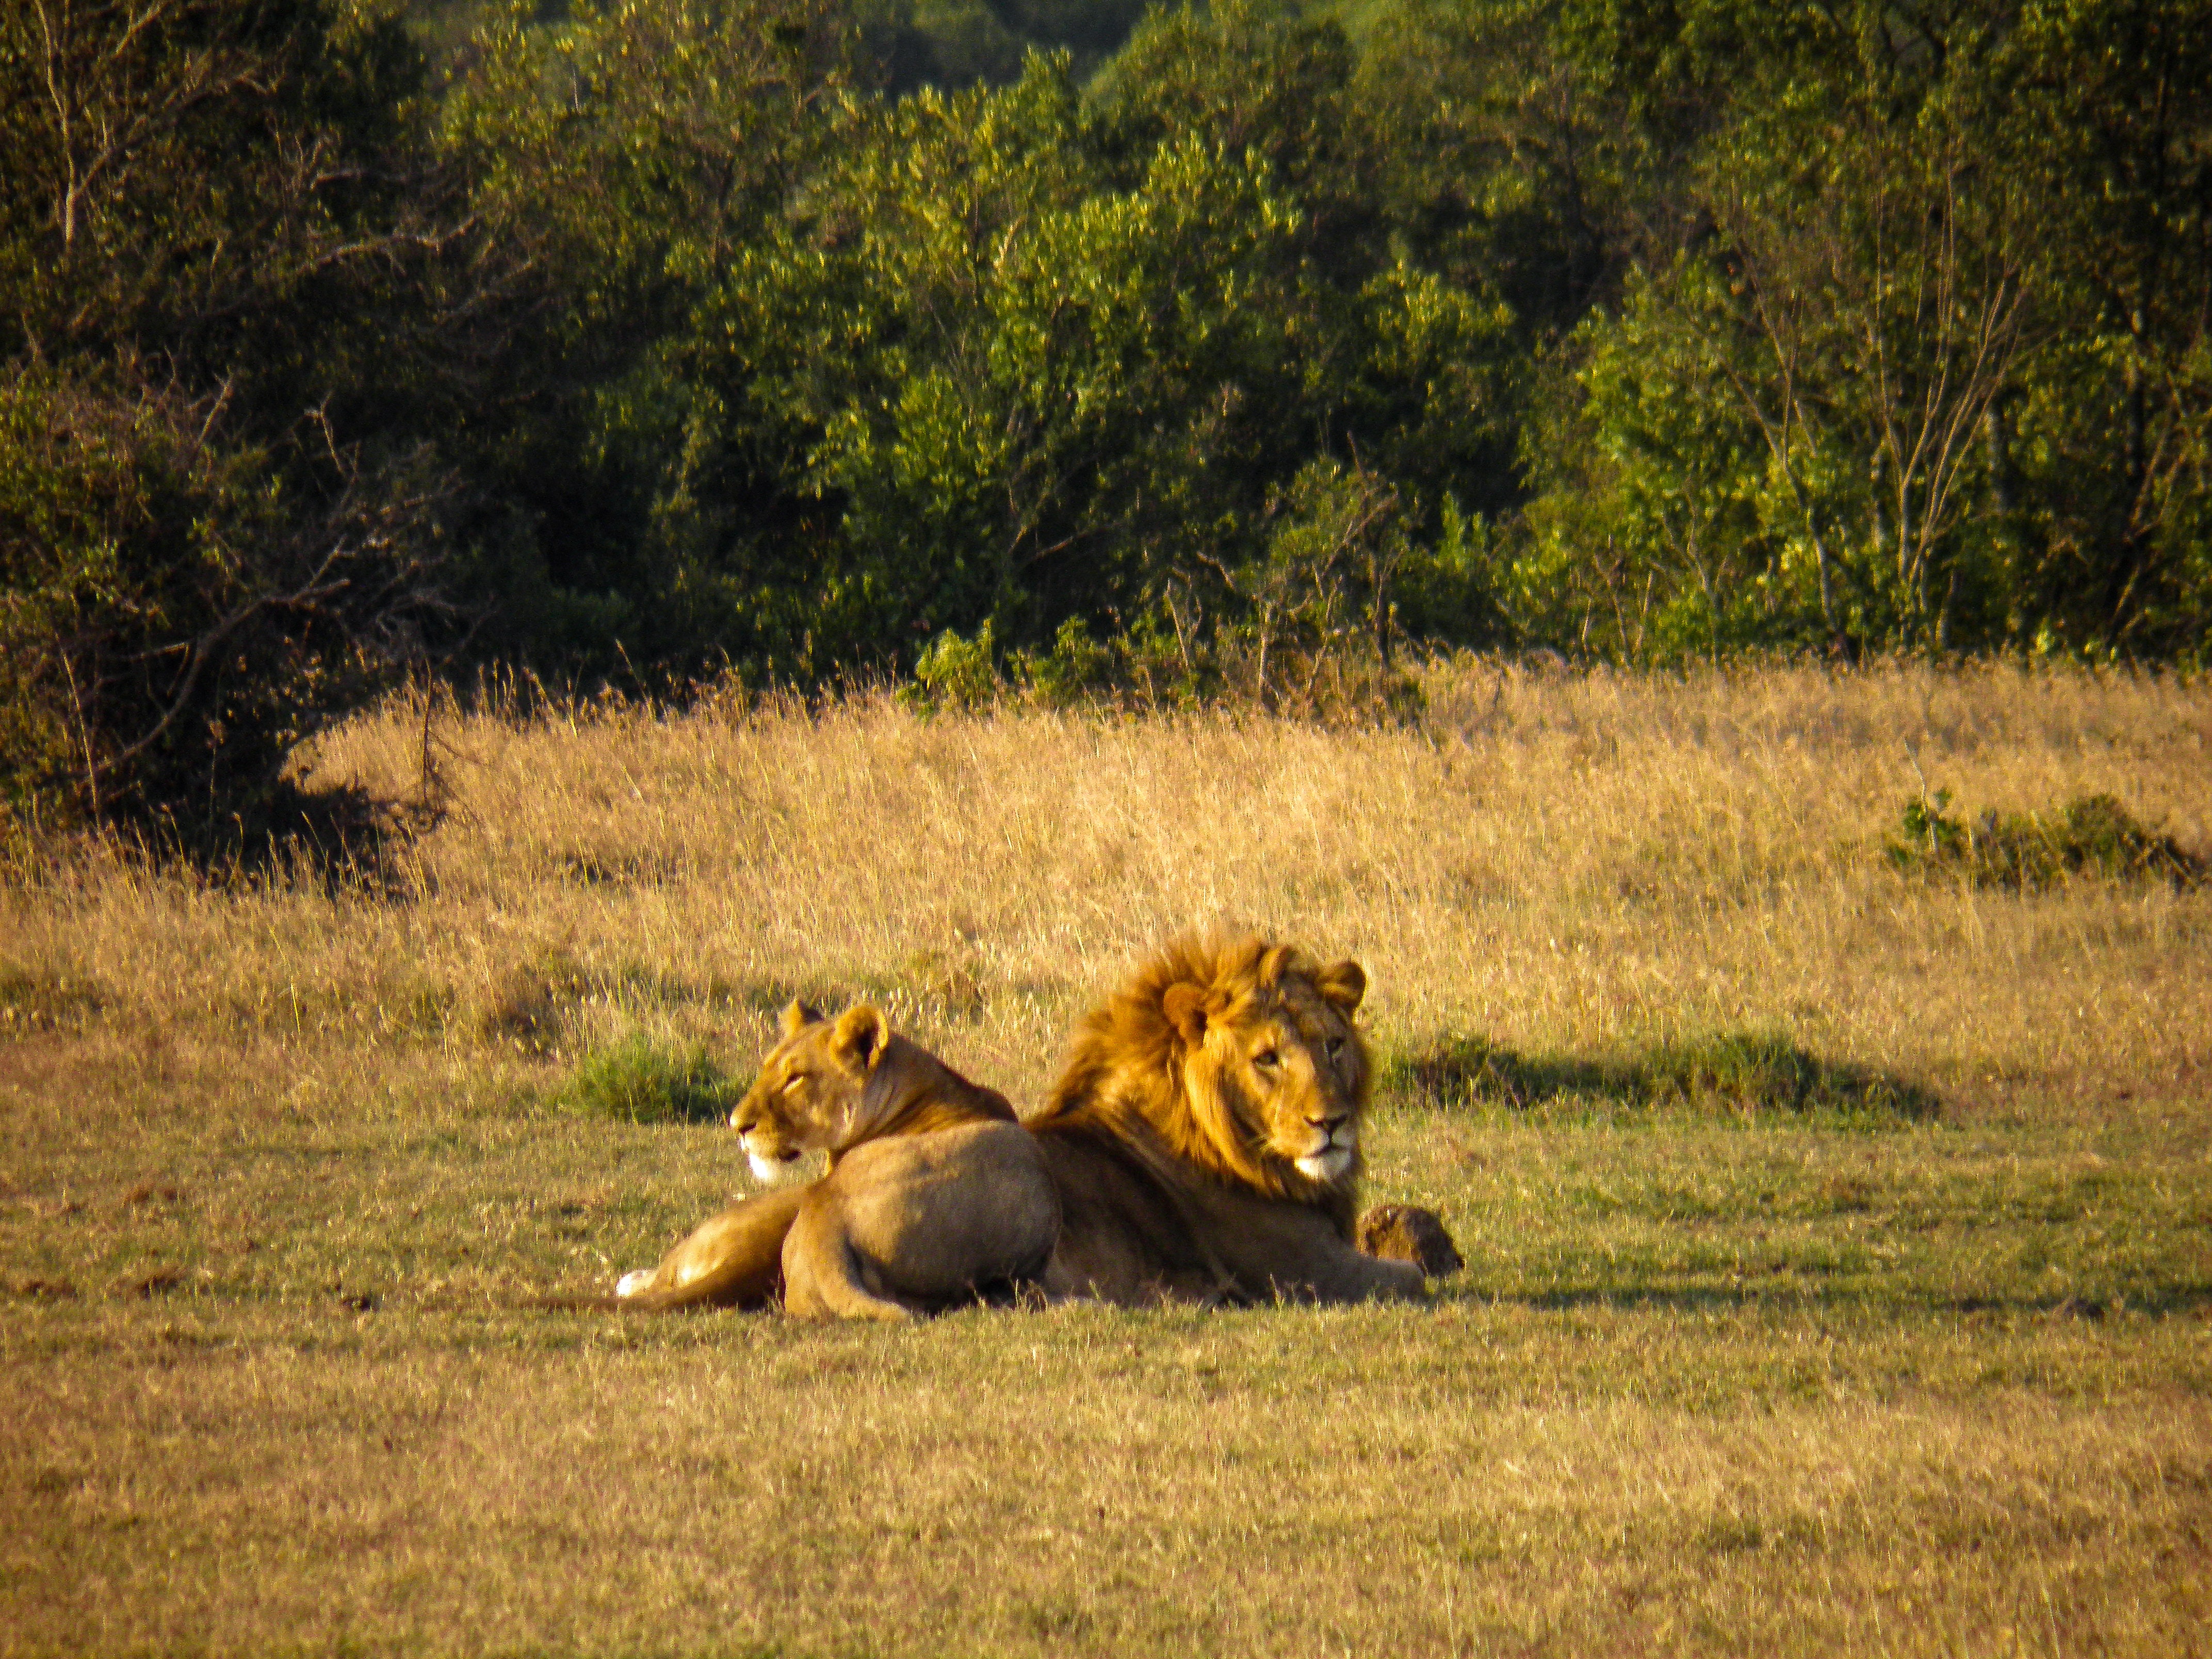 Male and Female Lions on Grass Field, Animals, Outdoors, Wildlife, Trees, HQ Photo